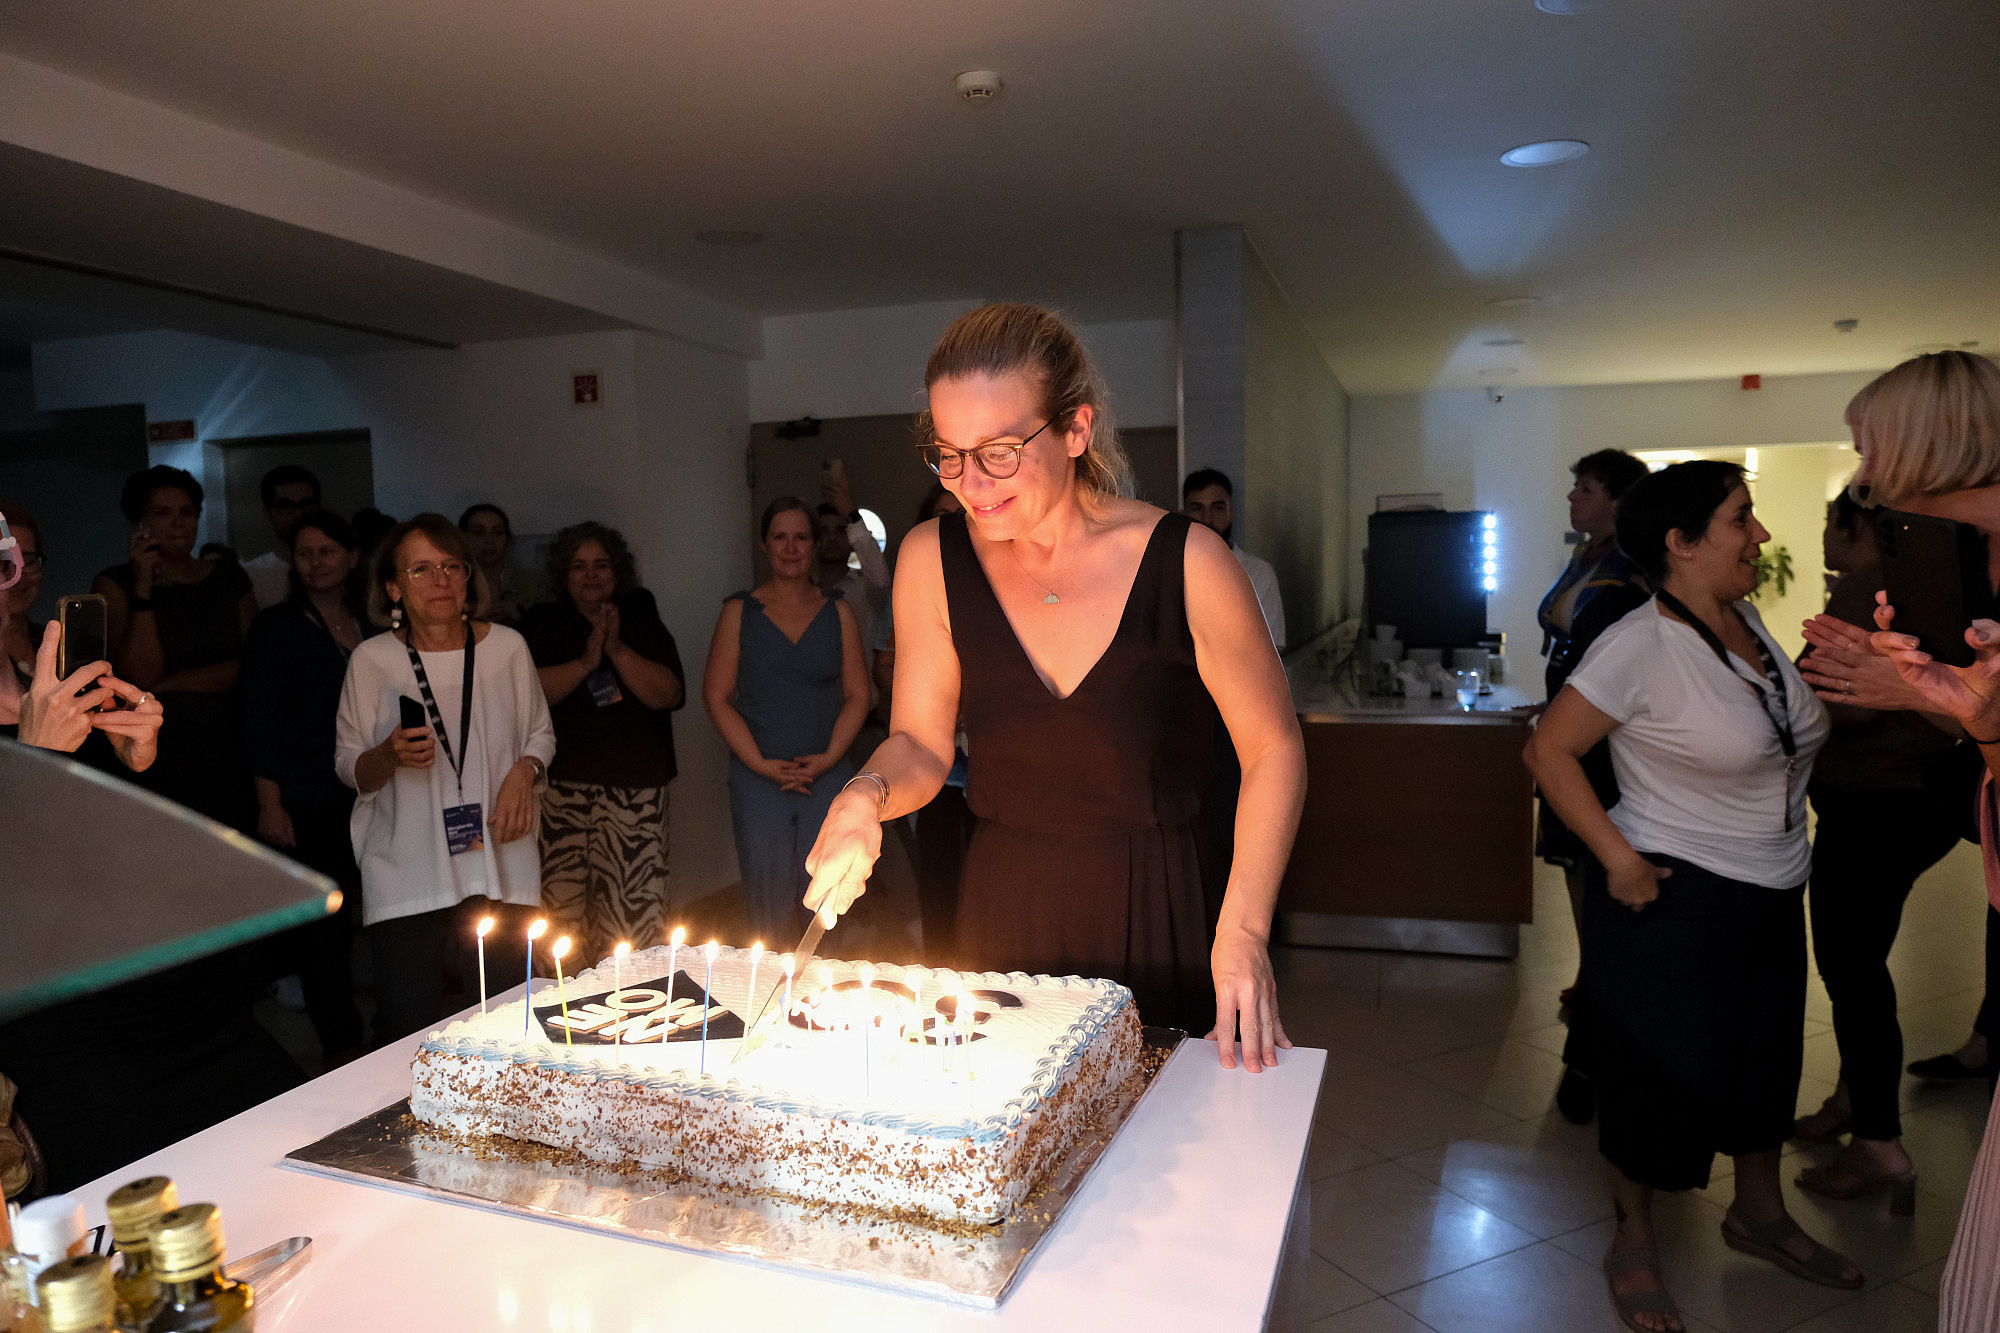 A person is cutting a cake lit by candles. Around them people are watching and taking photographs.  © Image: Jorge Gomes